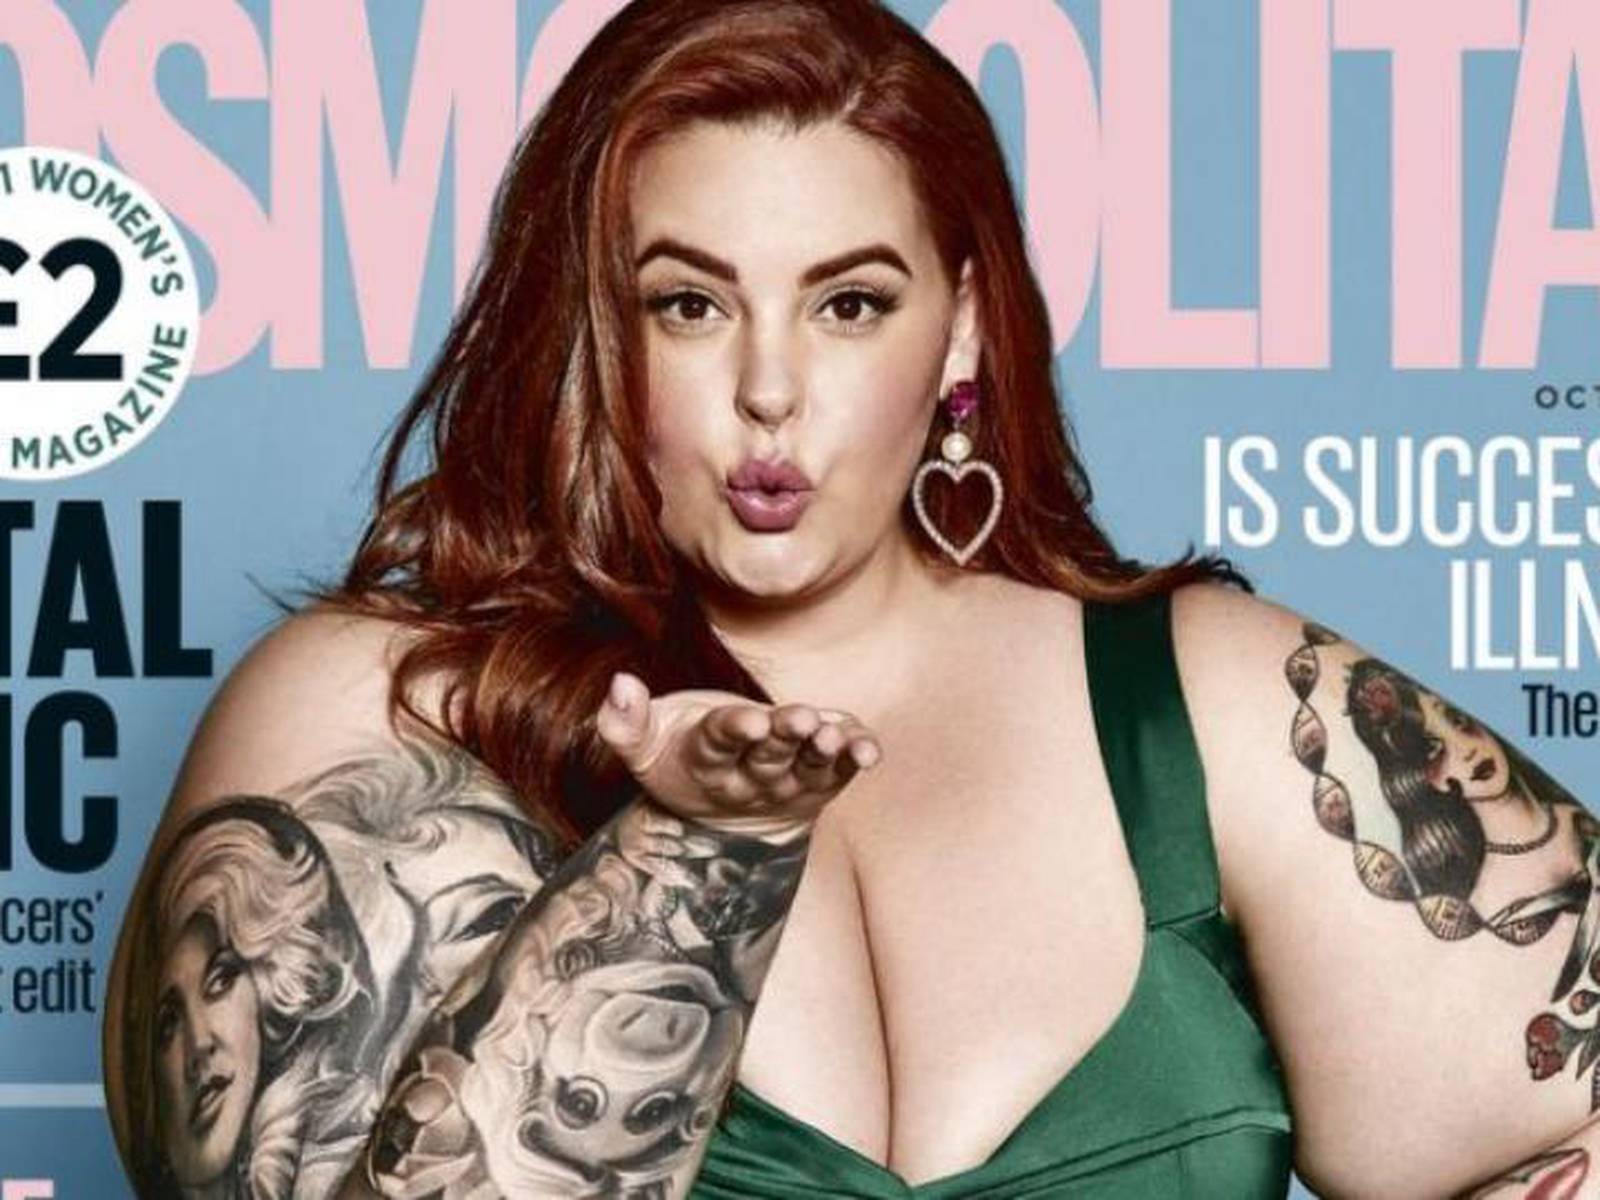 Overweight Cleavage Porn - Cosmopolitan magazine cover criticised for 'promoting obesity' â€“ The Irish  Times